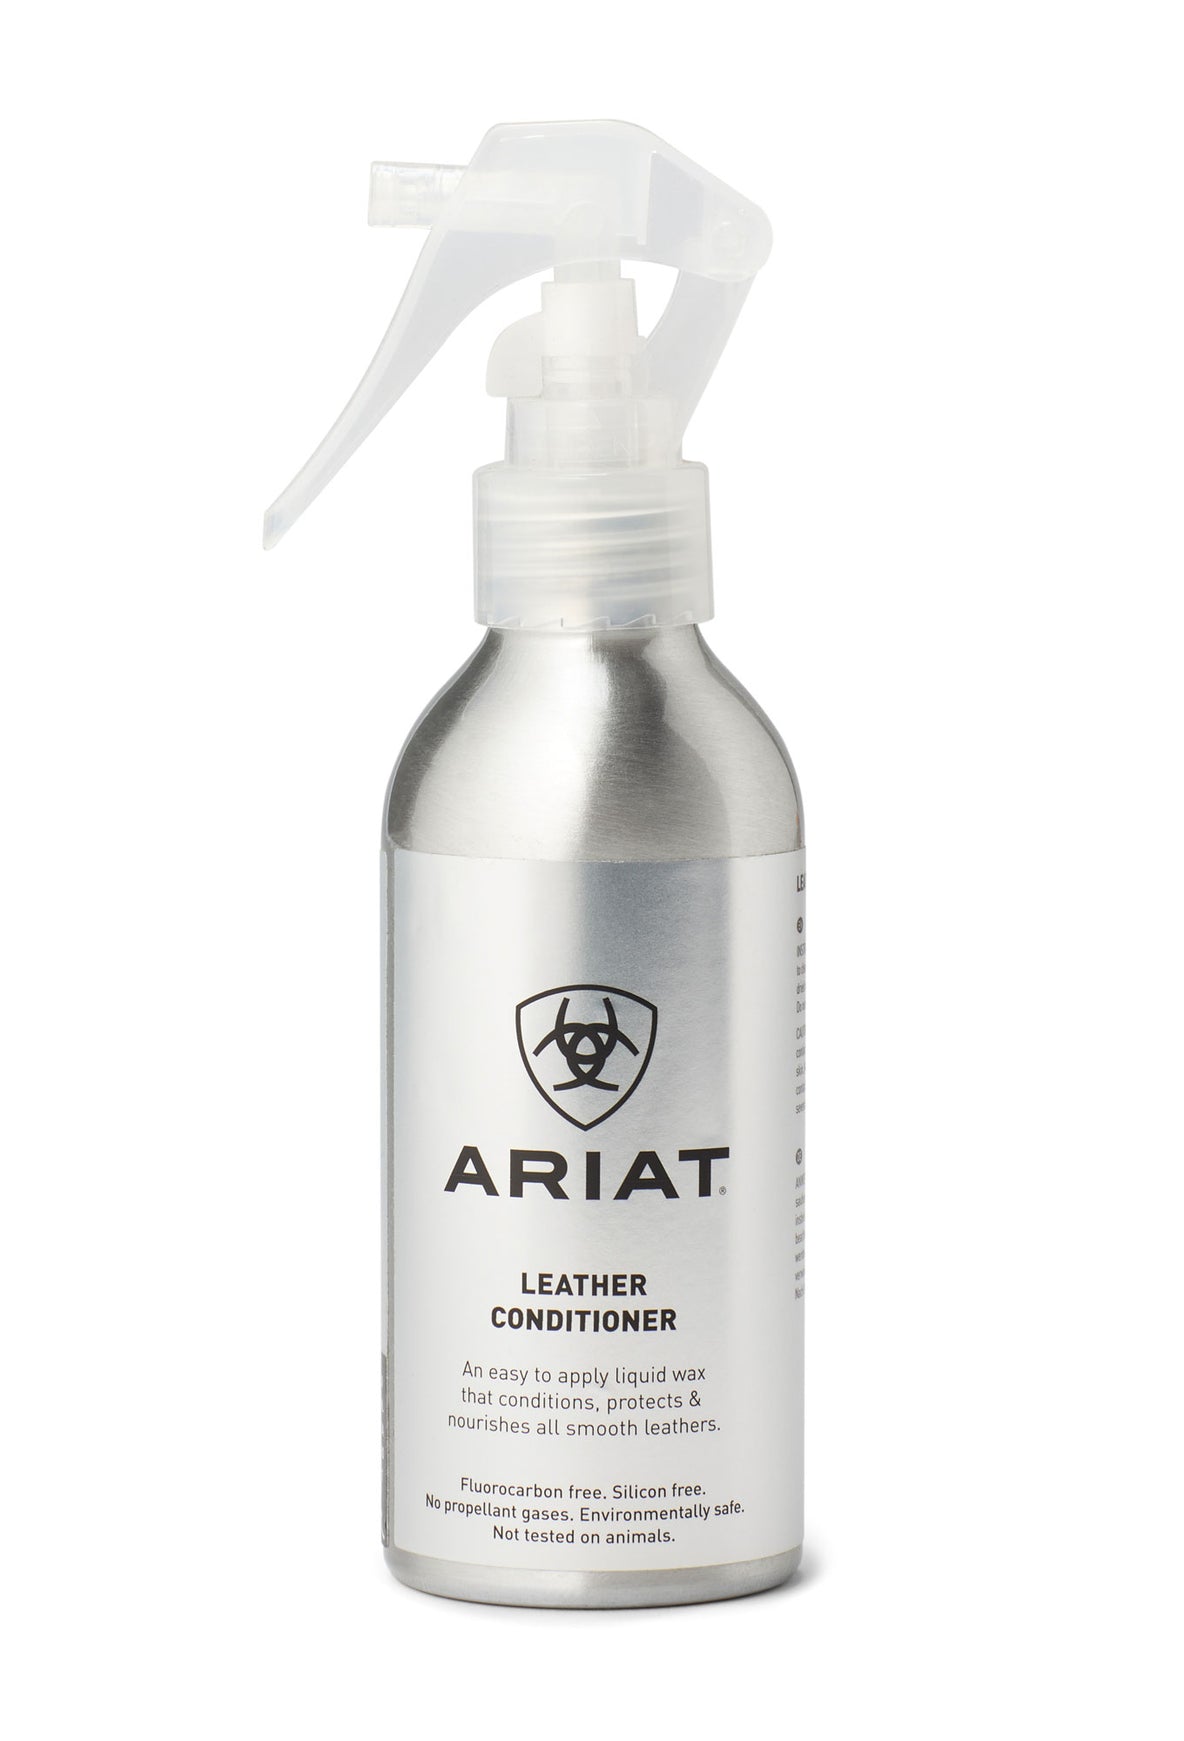 Ariat Leather Conditioner Footwear Care 